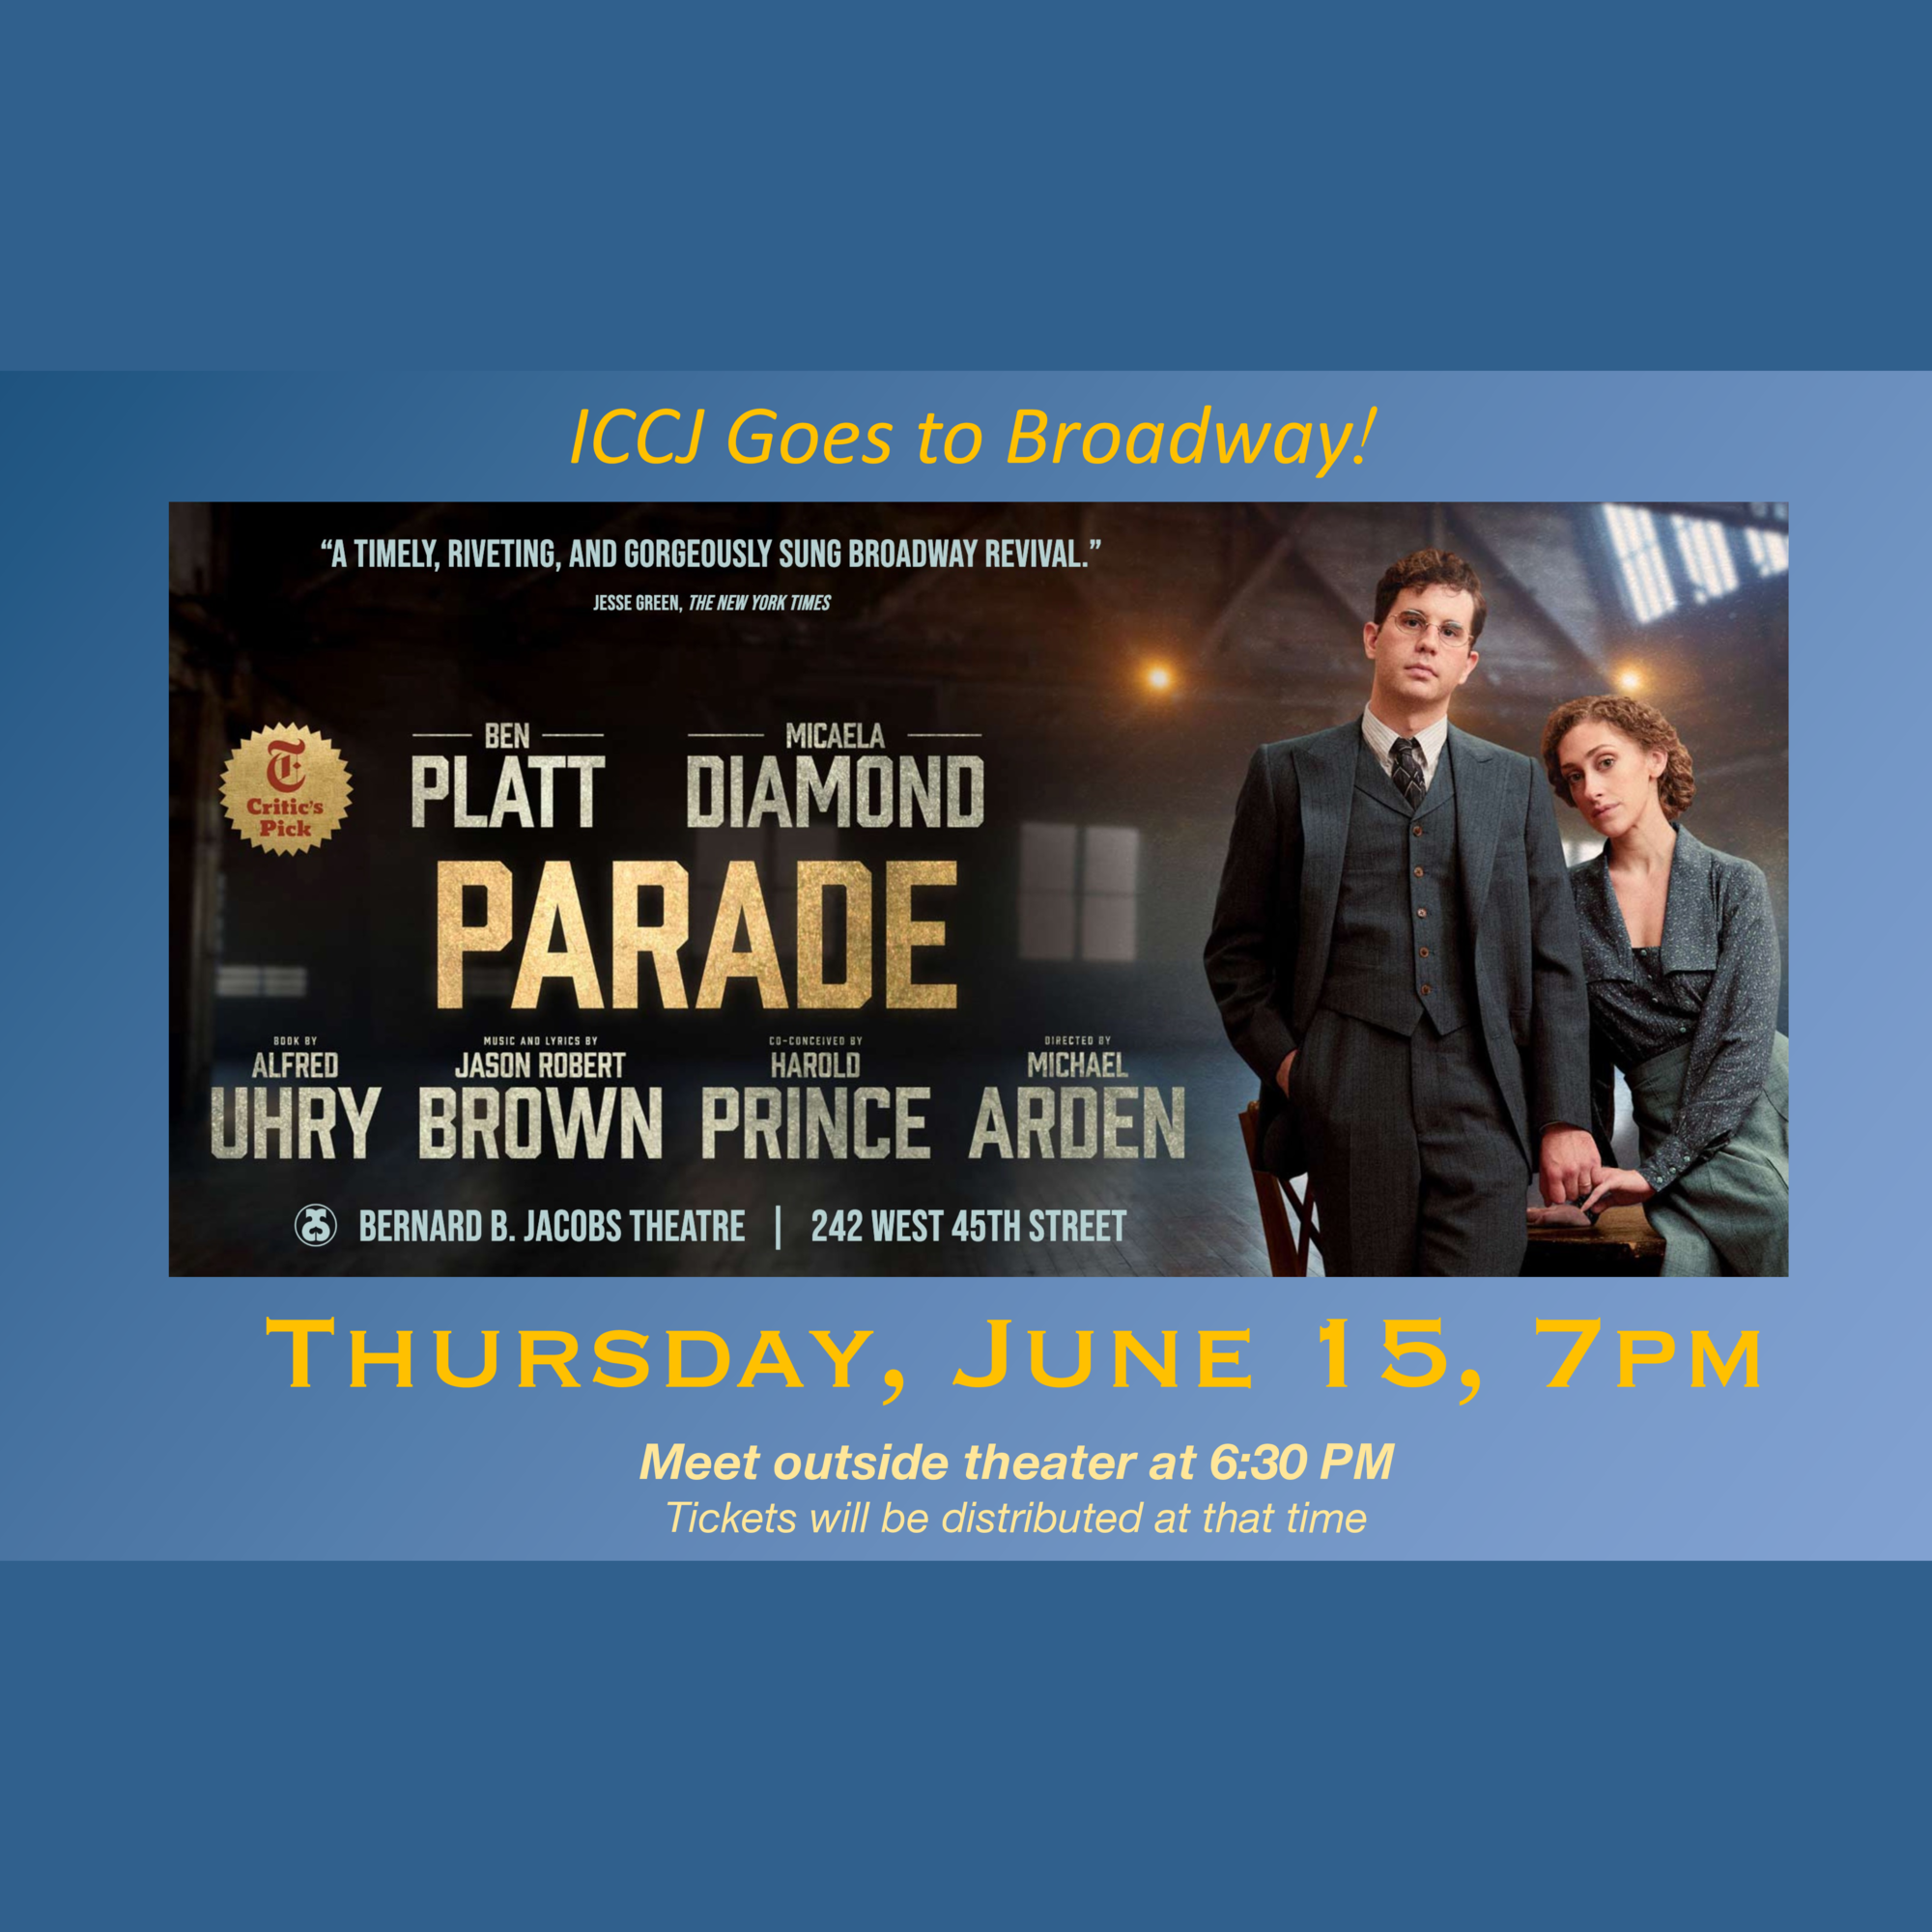 Parade: ICCJ goes to Broadway!